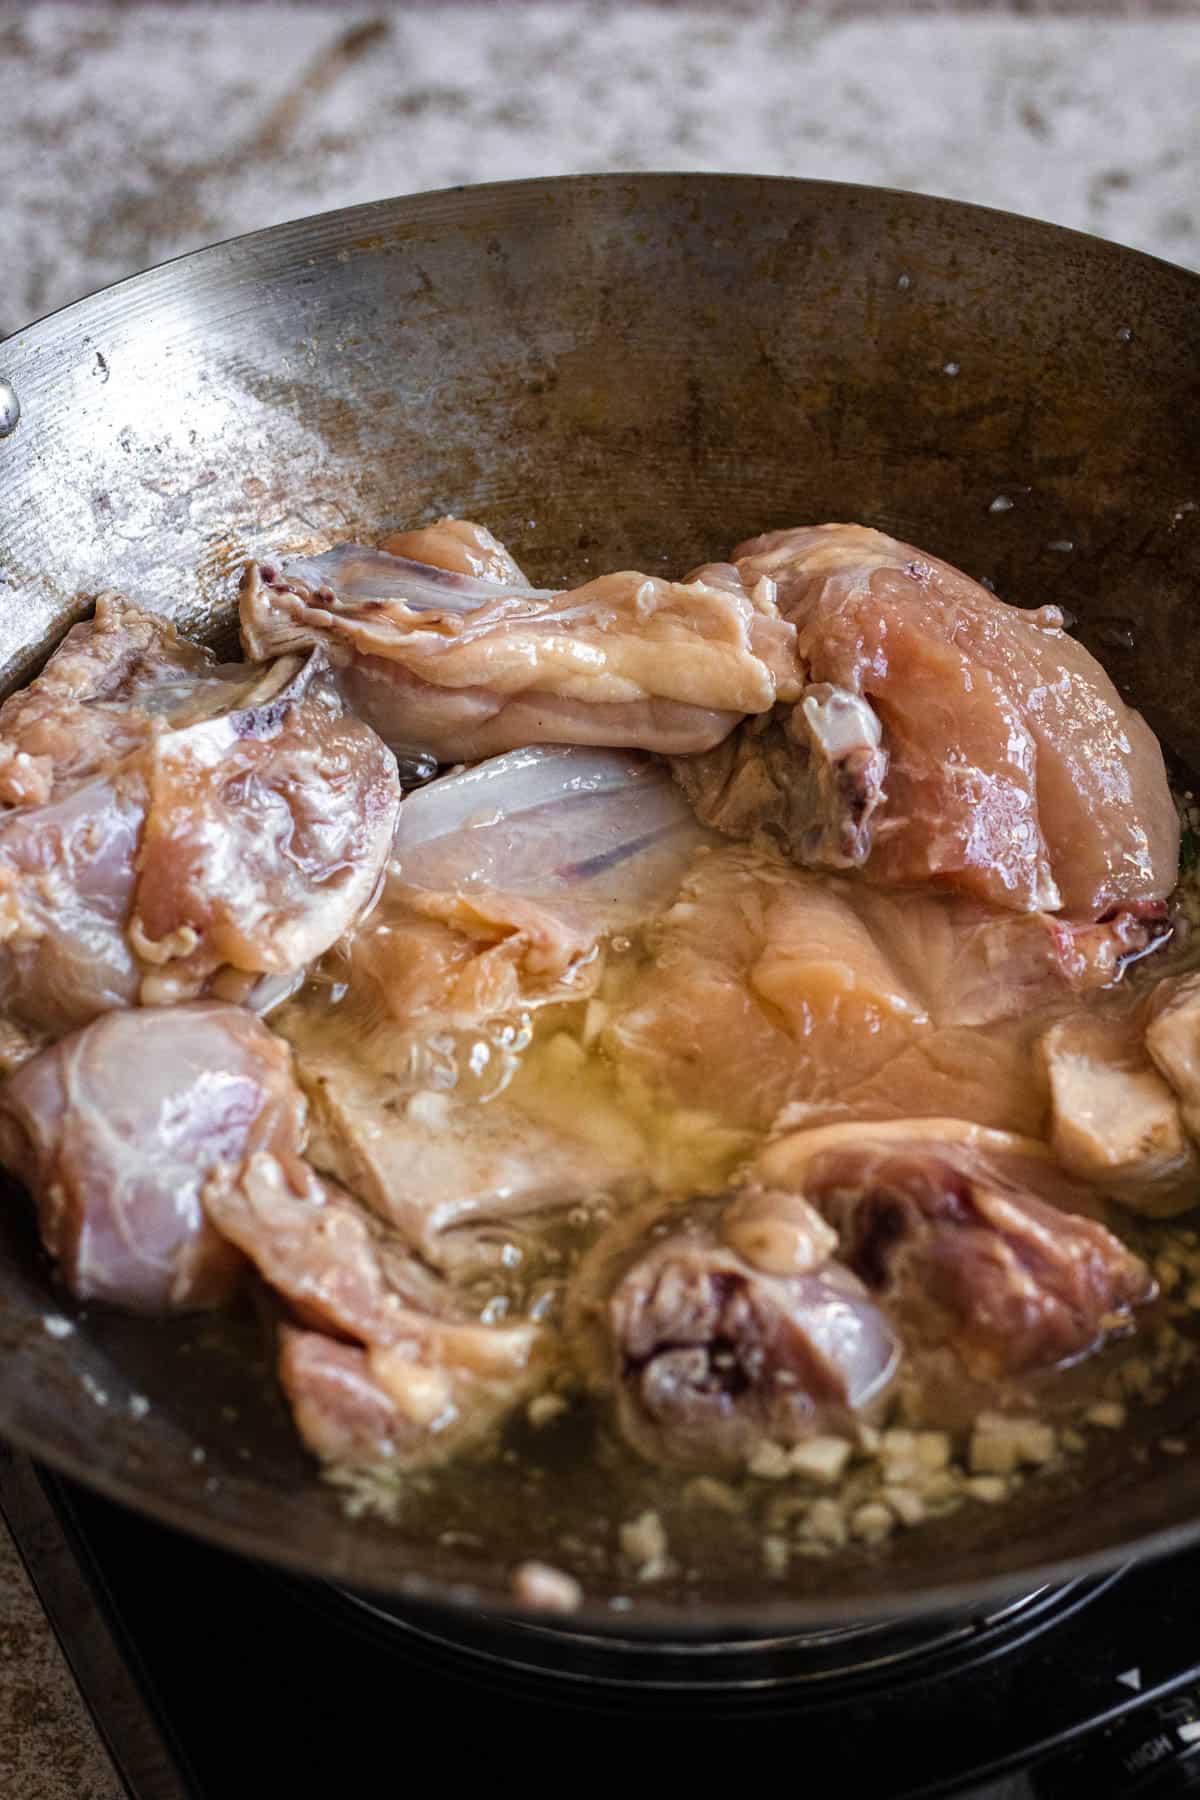 Chicken pieces added to the garlic in the wok. 